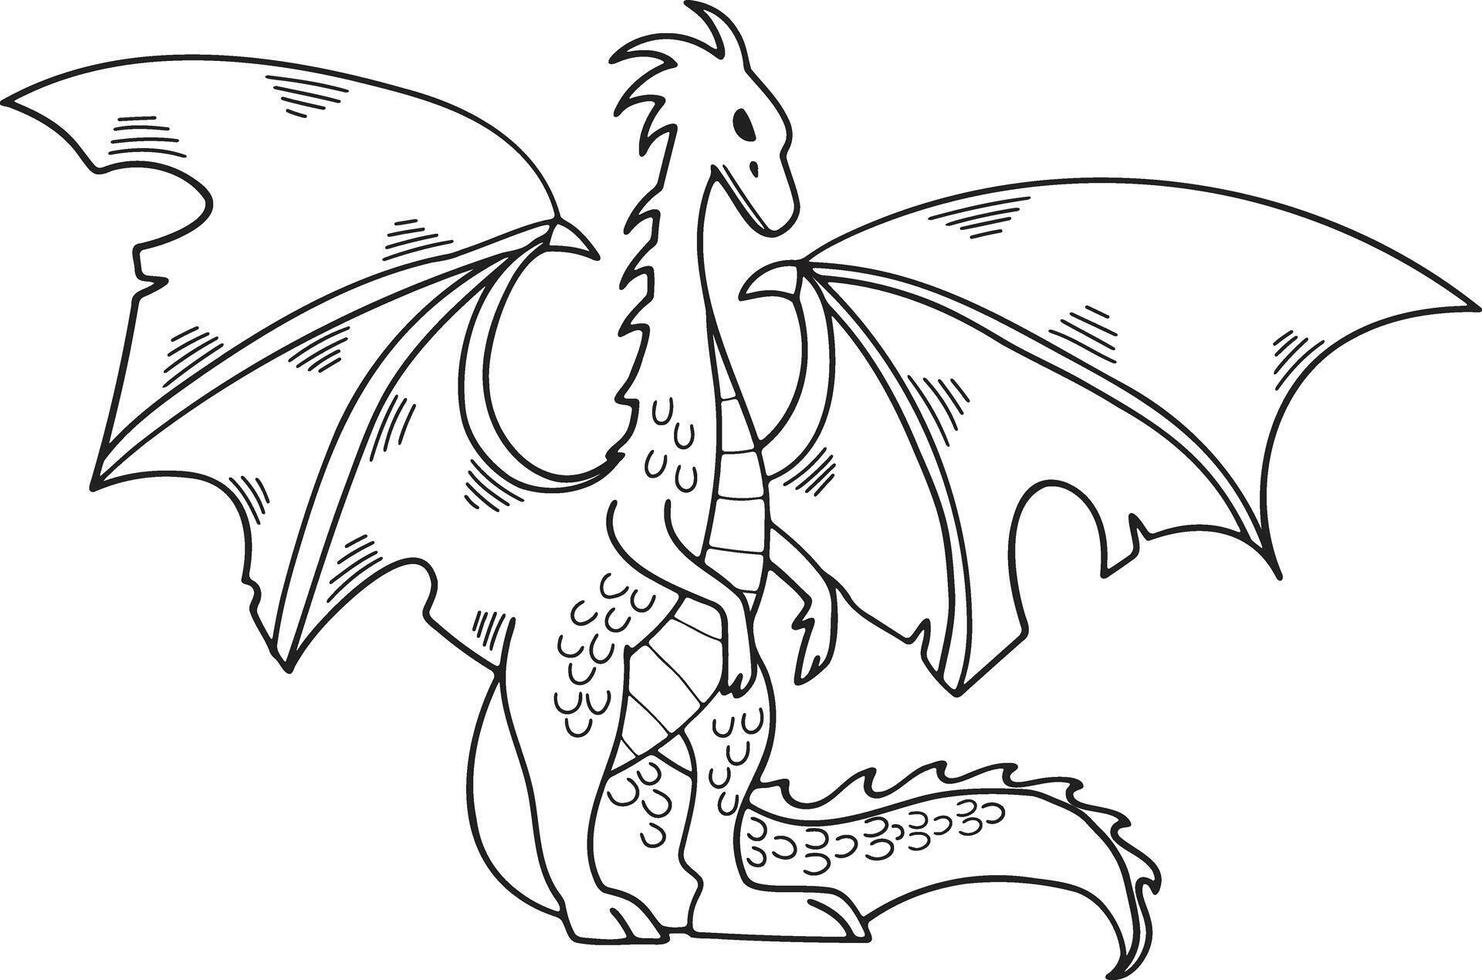 Hand Drawn dragon character in flat style vector